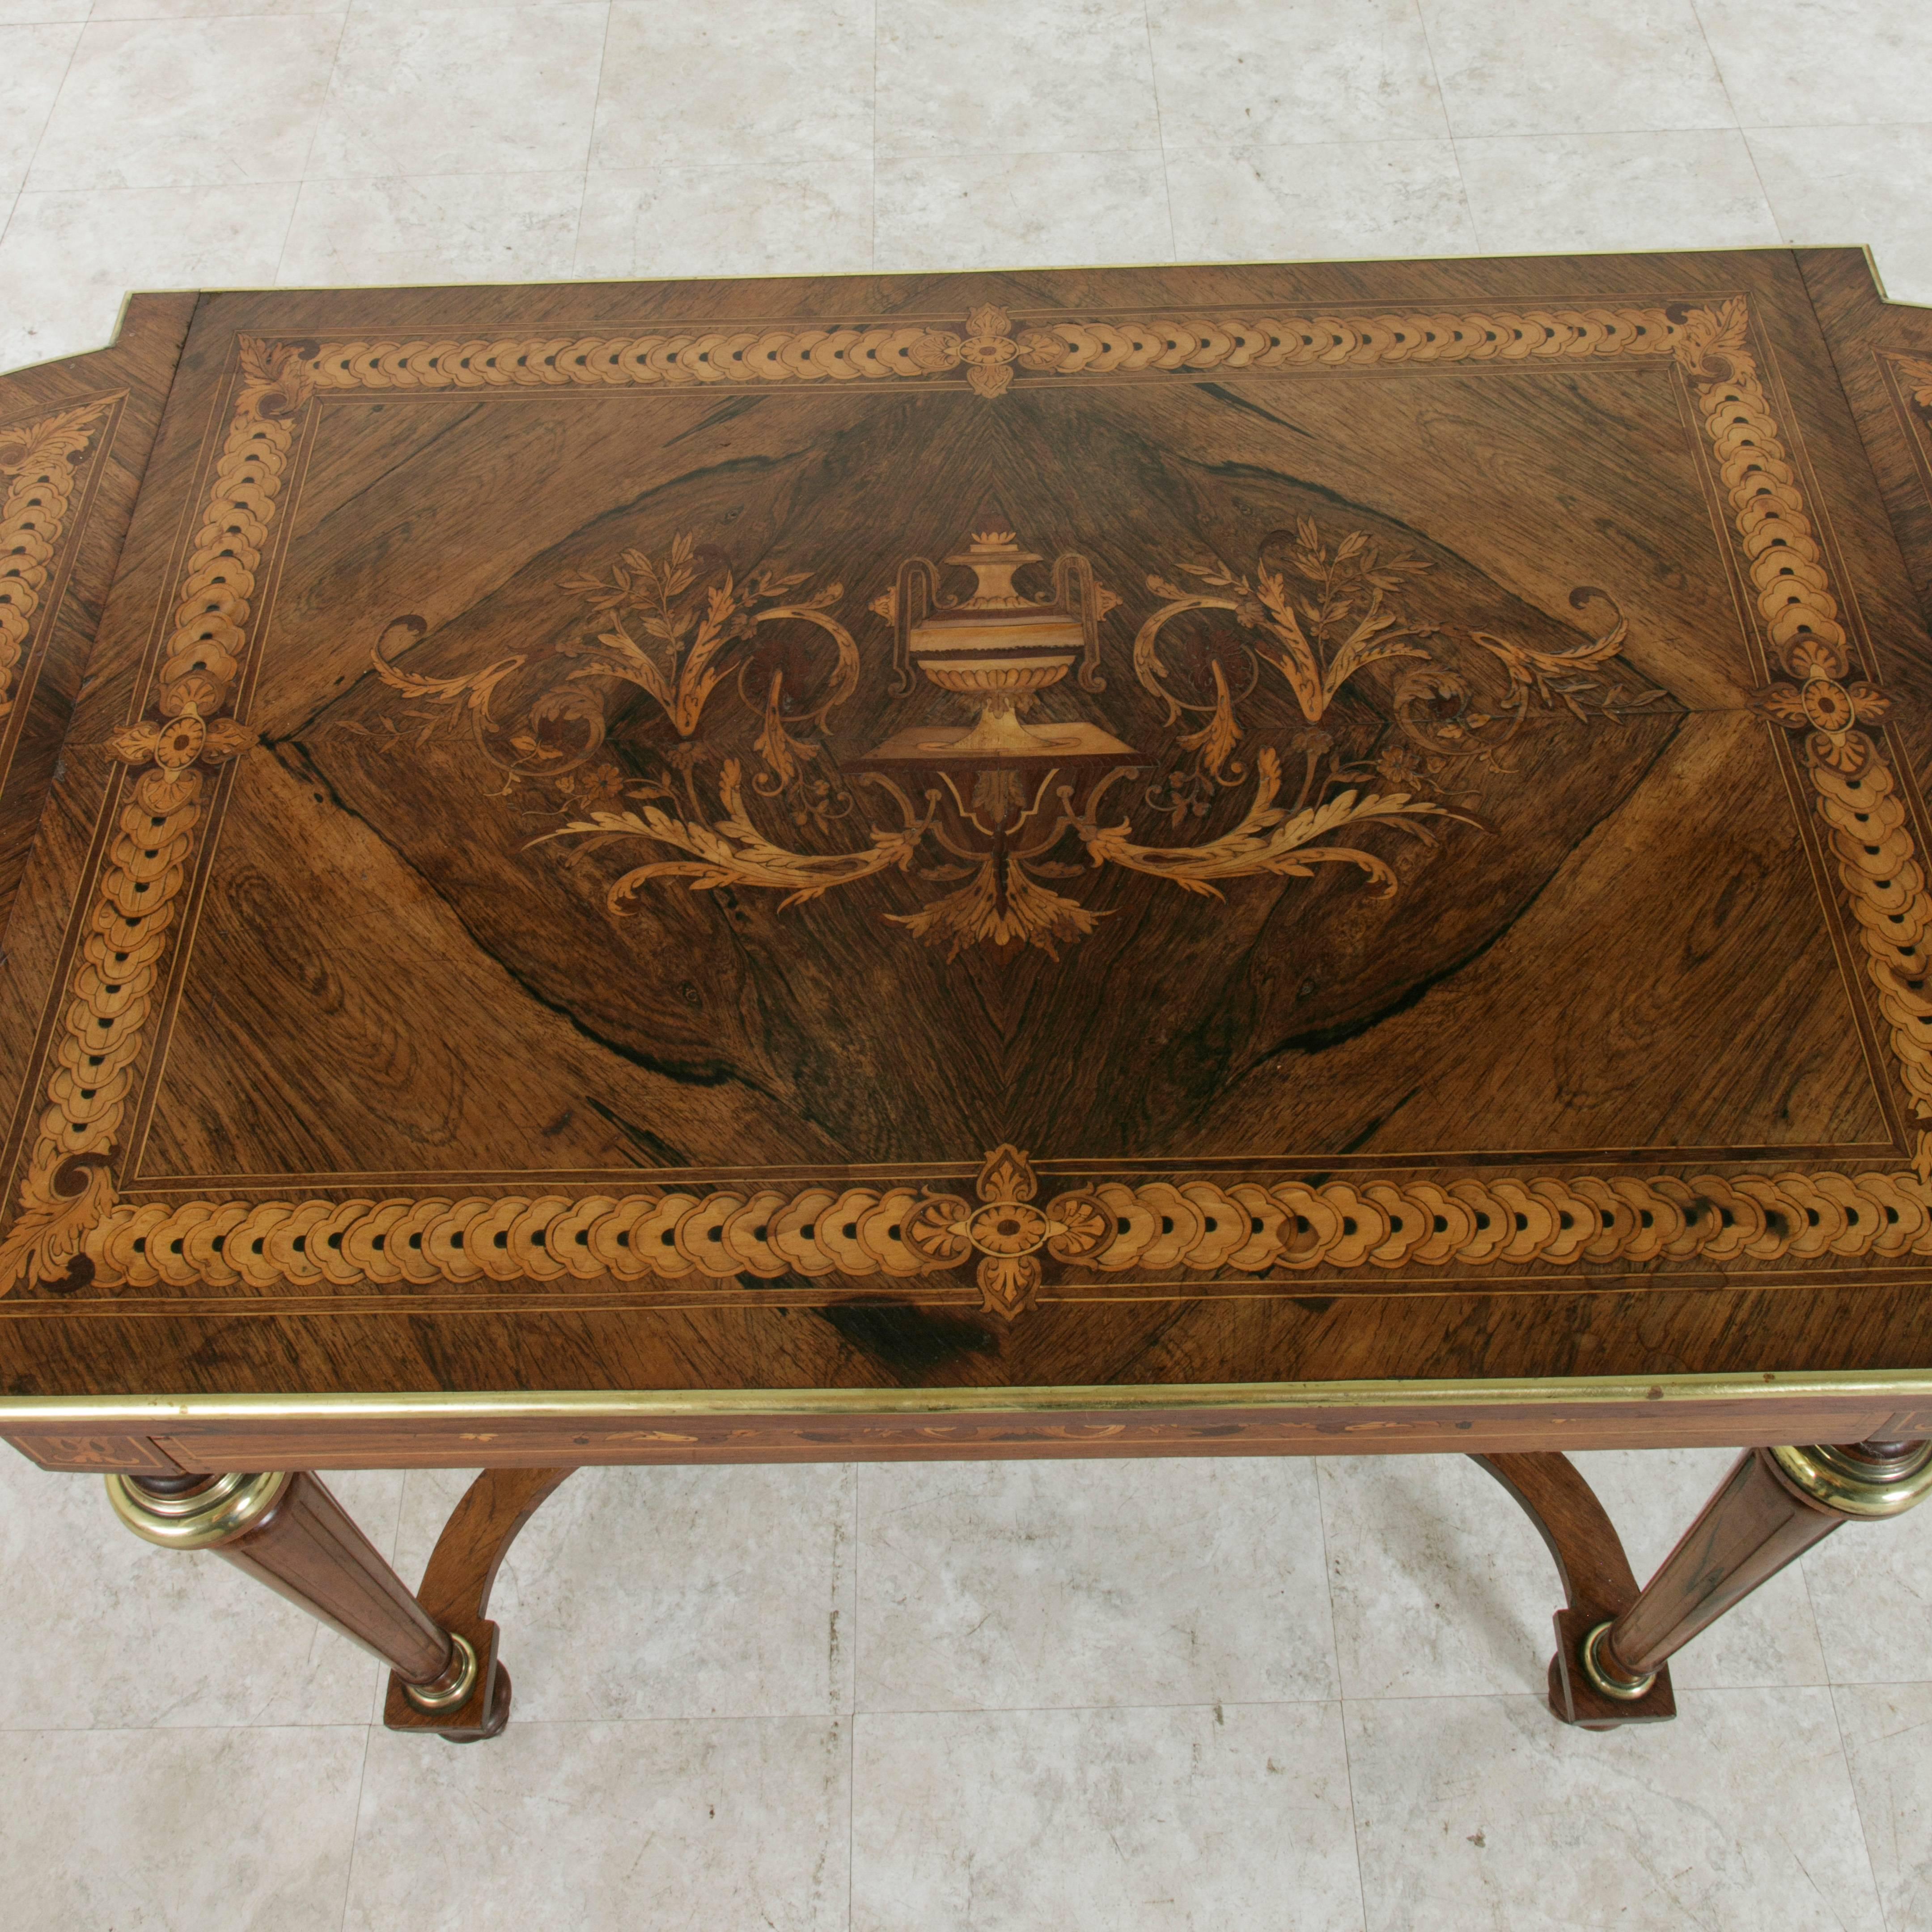 Inlay 19th Century Napoleon III Drop Leaf Marquetry Table with Exotic Woods and Bronze